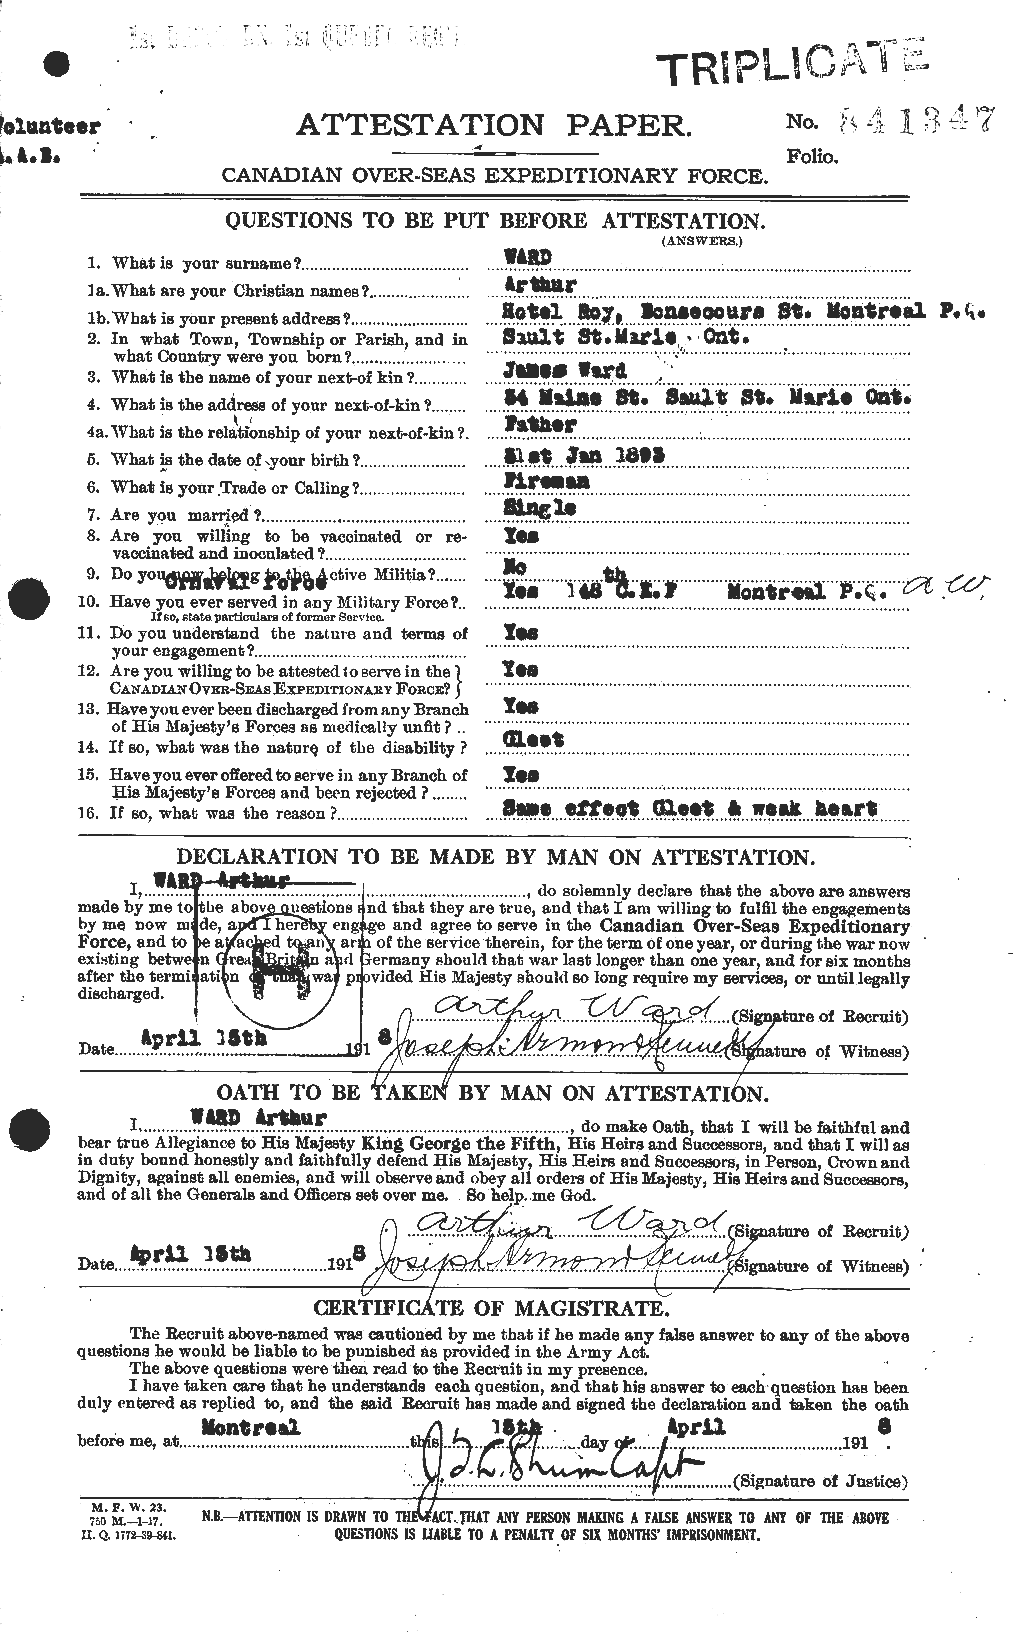 Personnel Records of the First World War - CEF 655144a